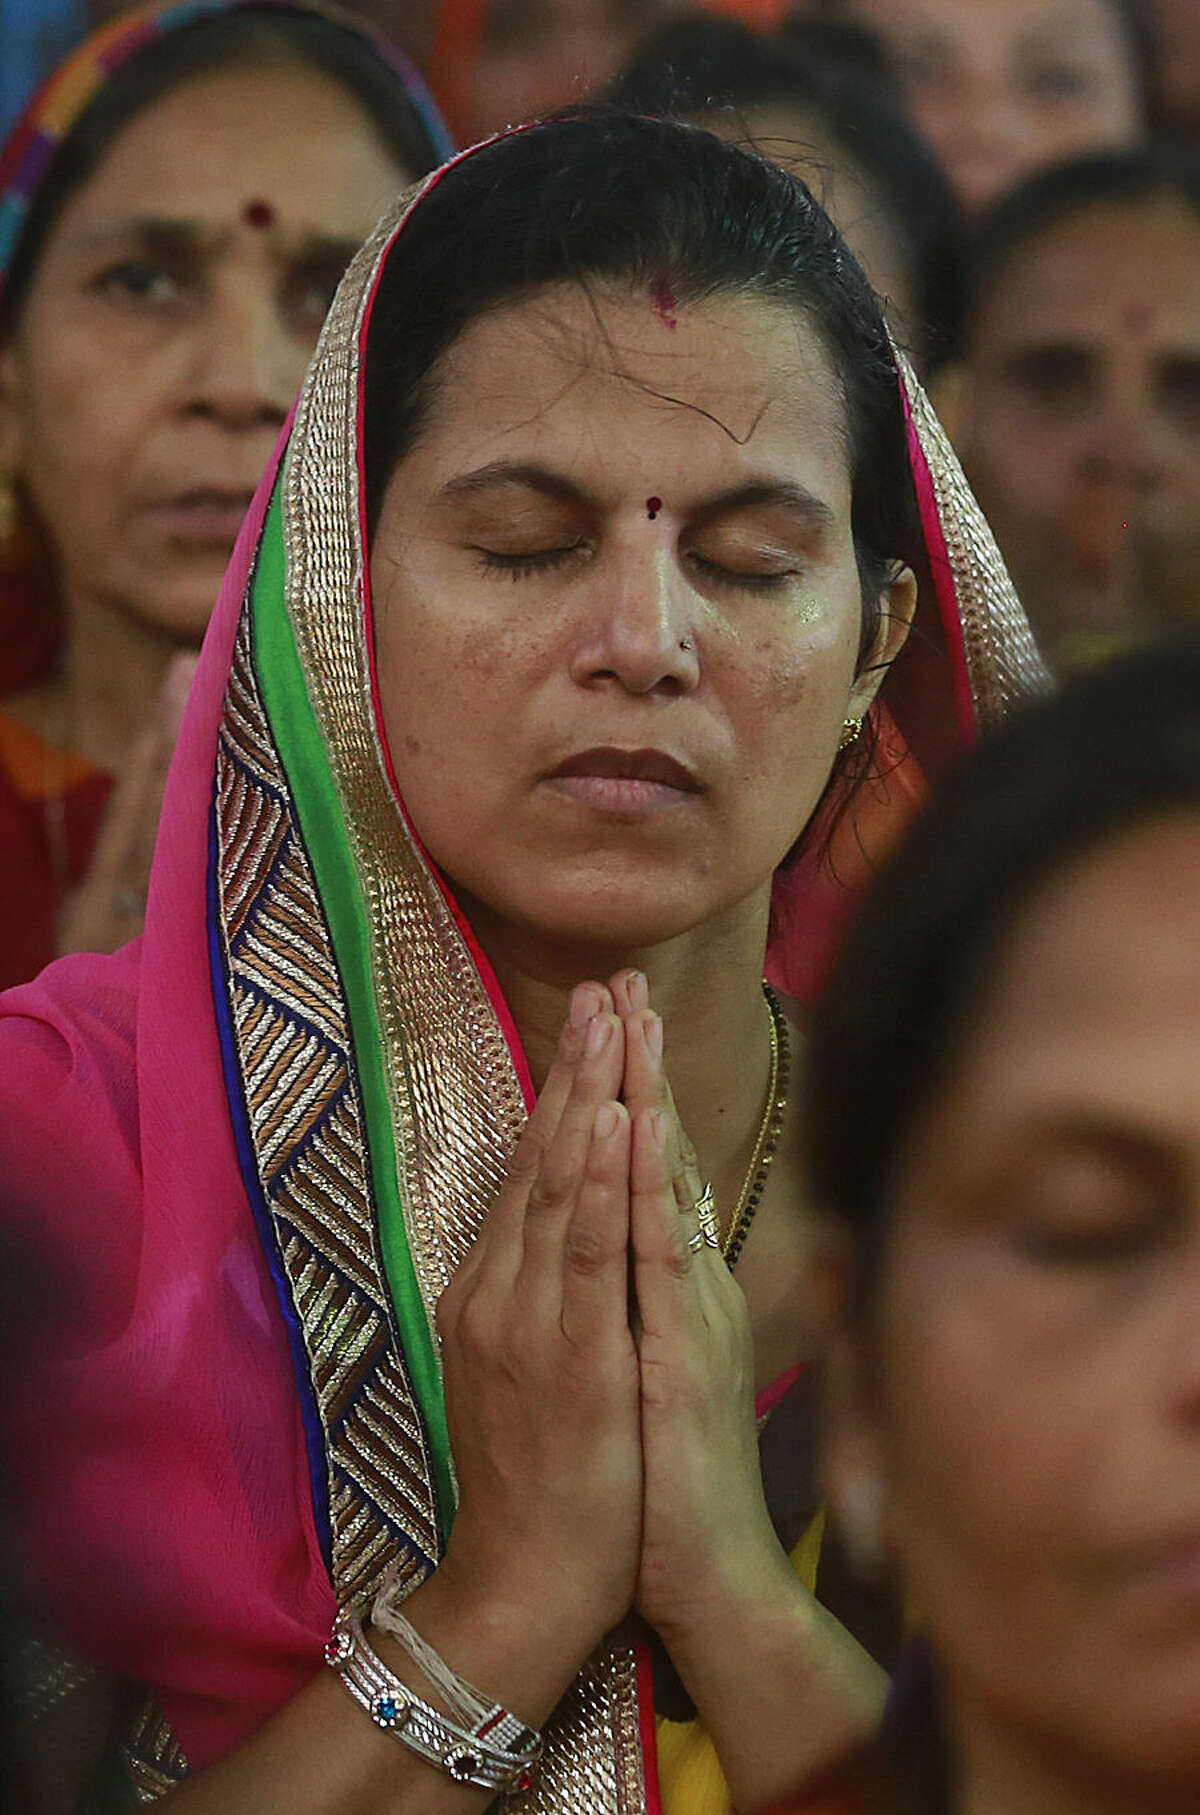 A member of India's Jain community offers prayers during a protest in Mumbai, India, Monday, Aug. 24, 2015. The Jains across India Monday protested against the recent Rajasthan High Court order banning the Jain religious ritual of Santhara, a practice of voluntarily fasting unto death. (AP Photo/Rafiq Maqbool)